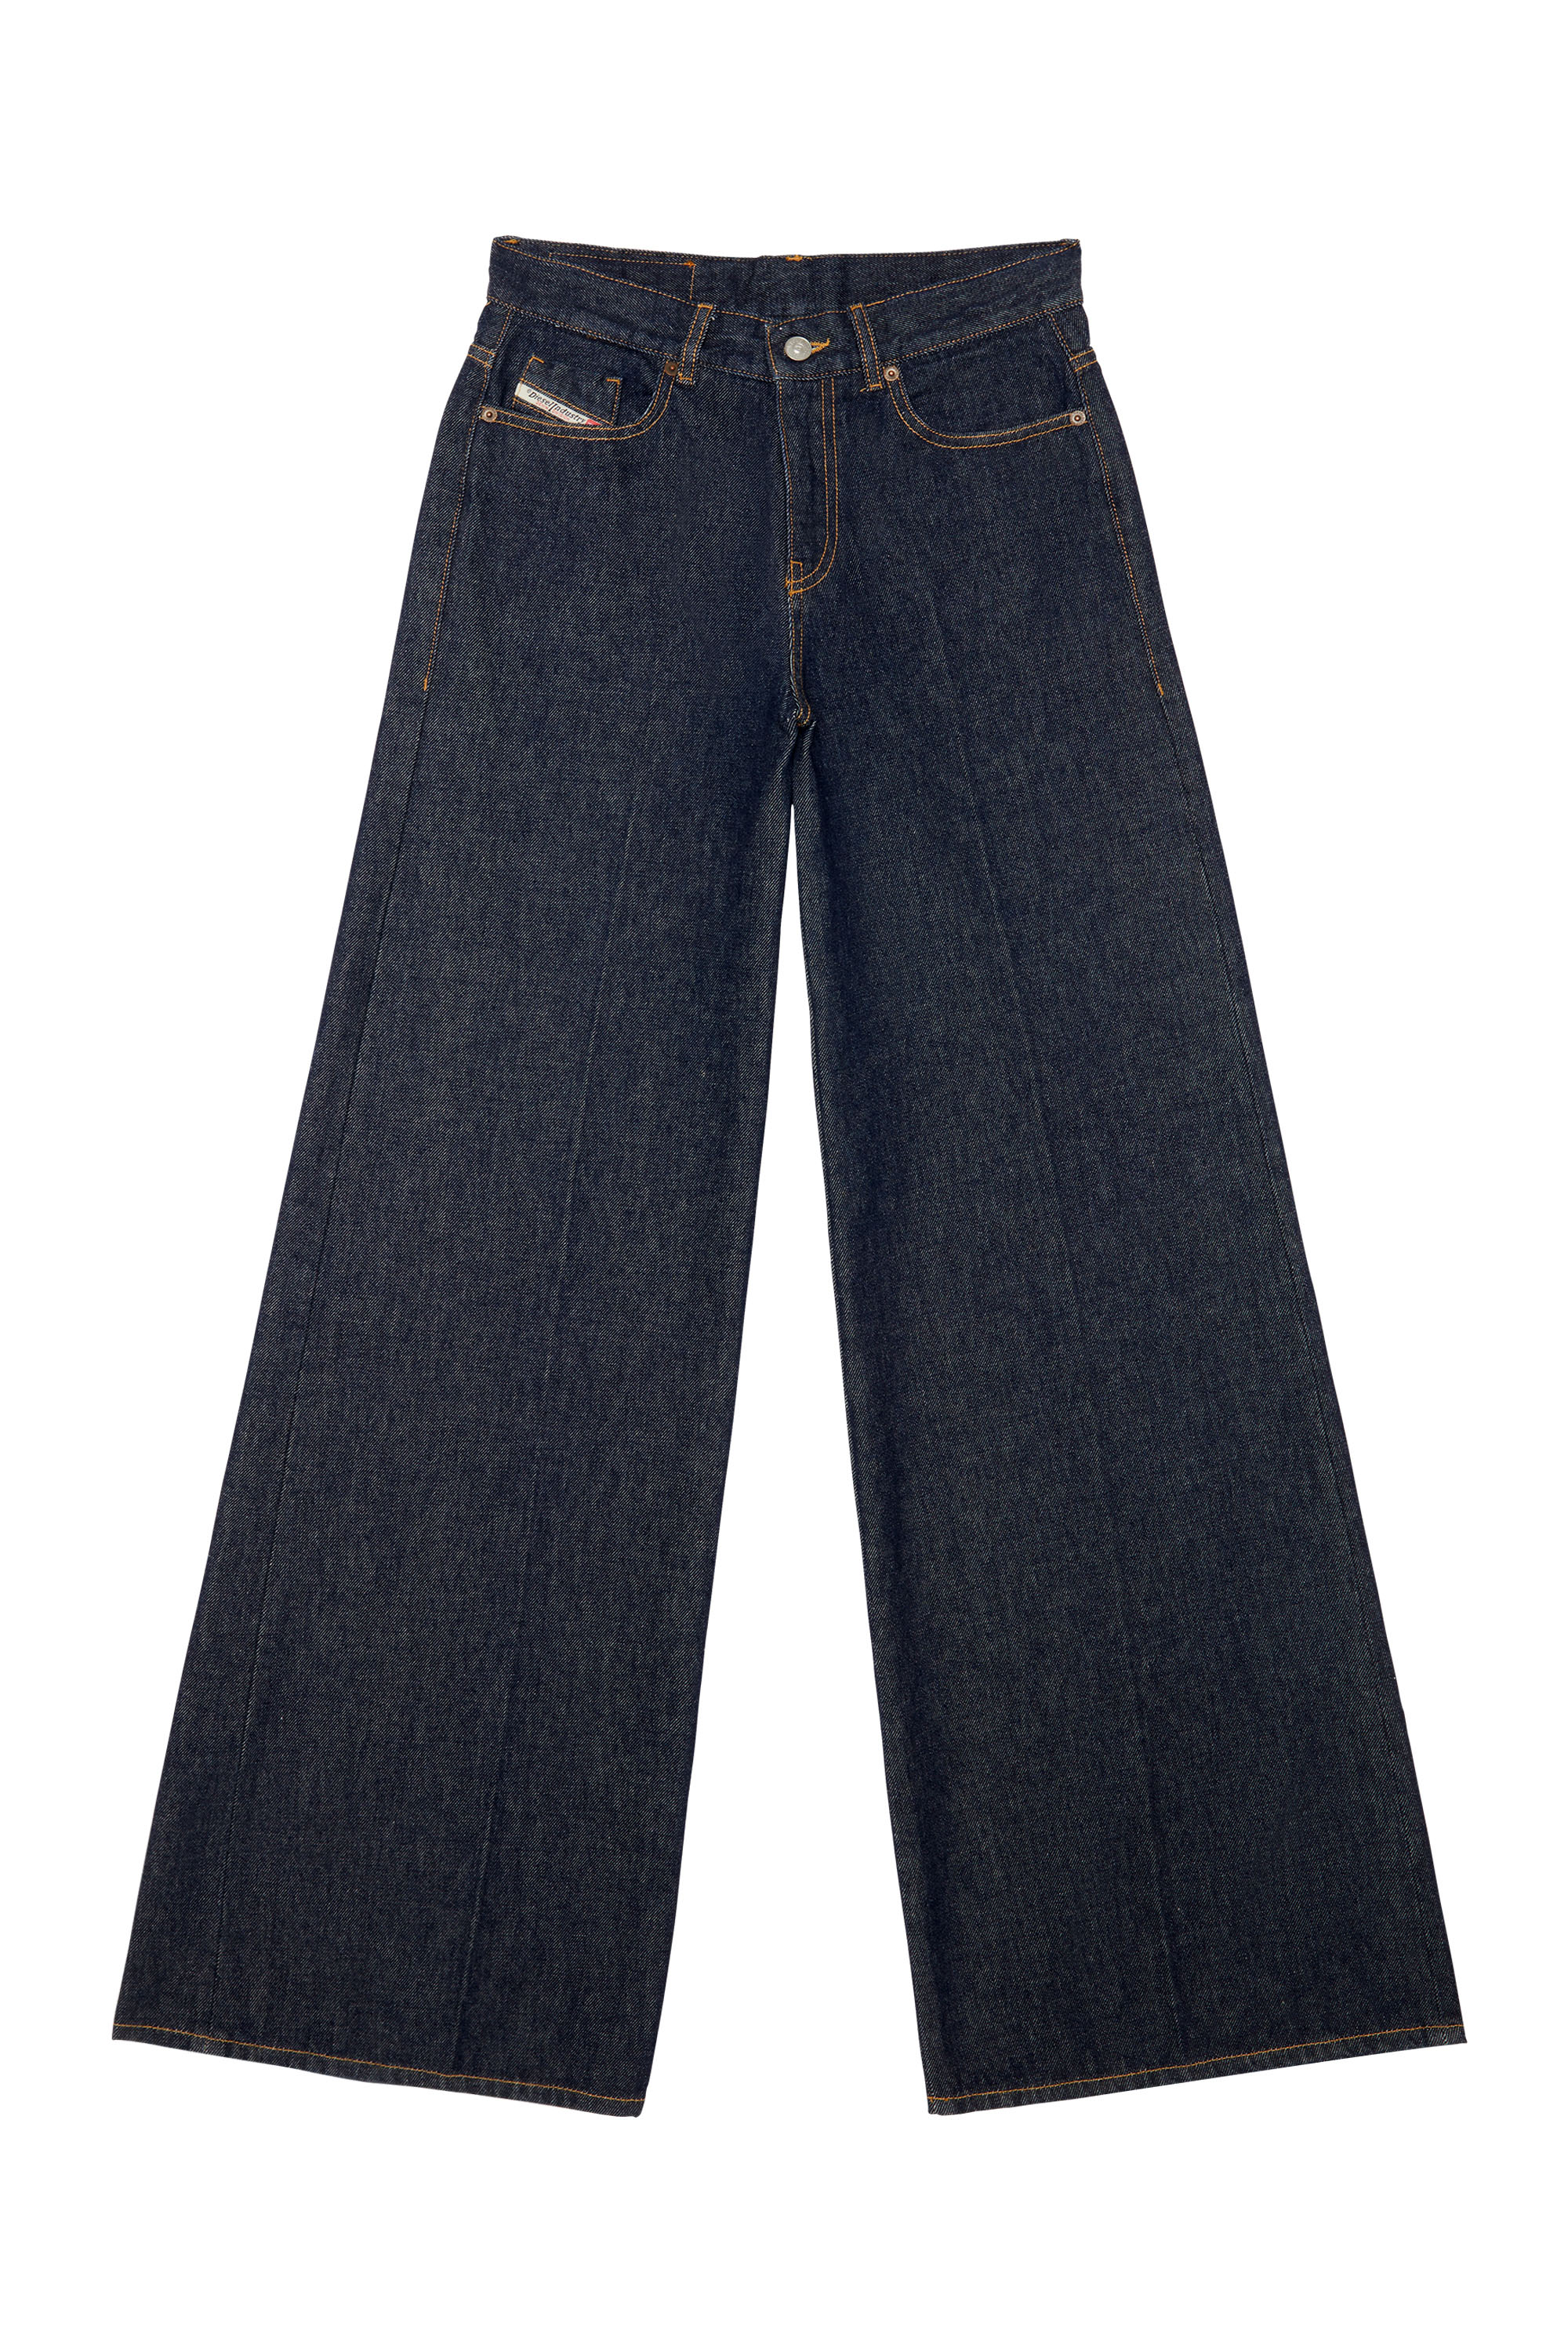 1978 D-Akemi Z9C02 Bootcut and Flare Jeans, Dark Blue